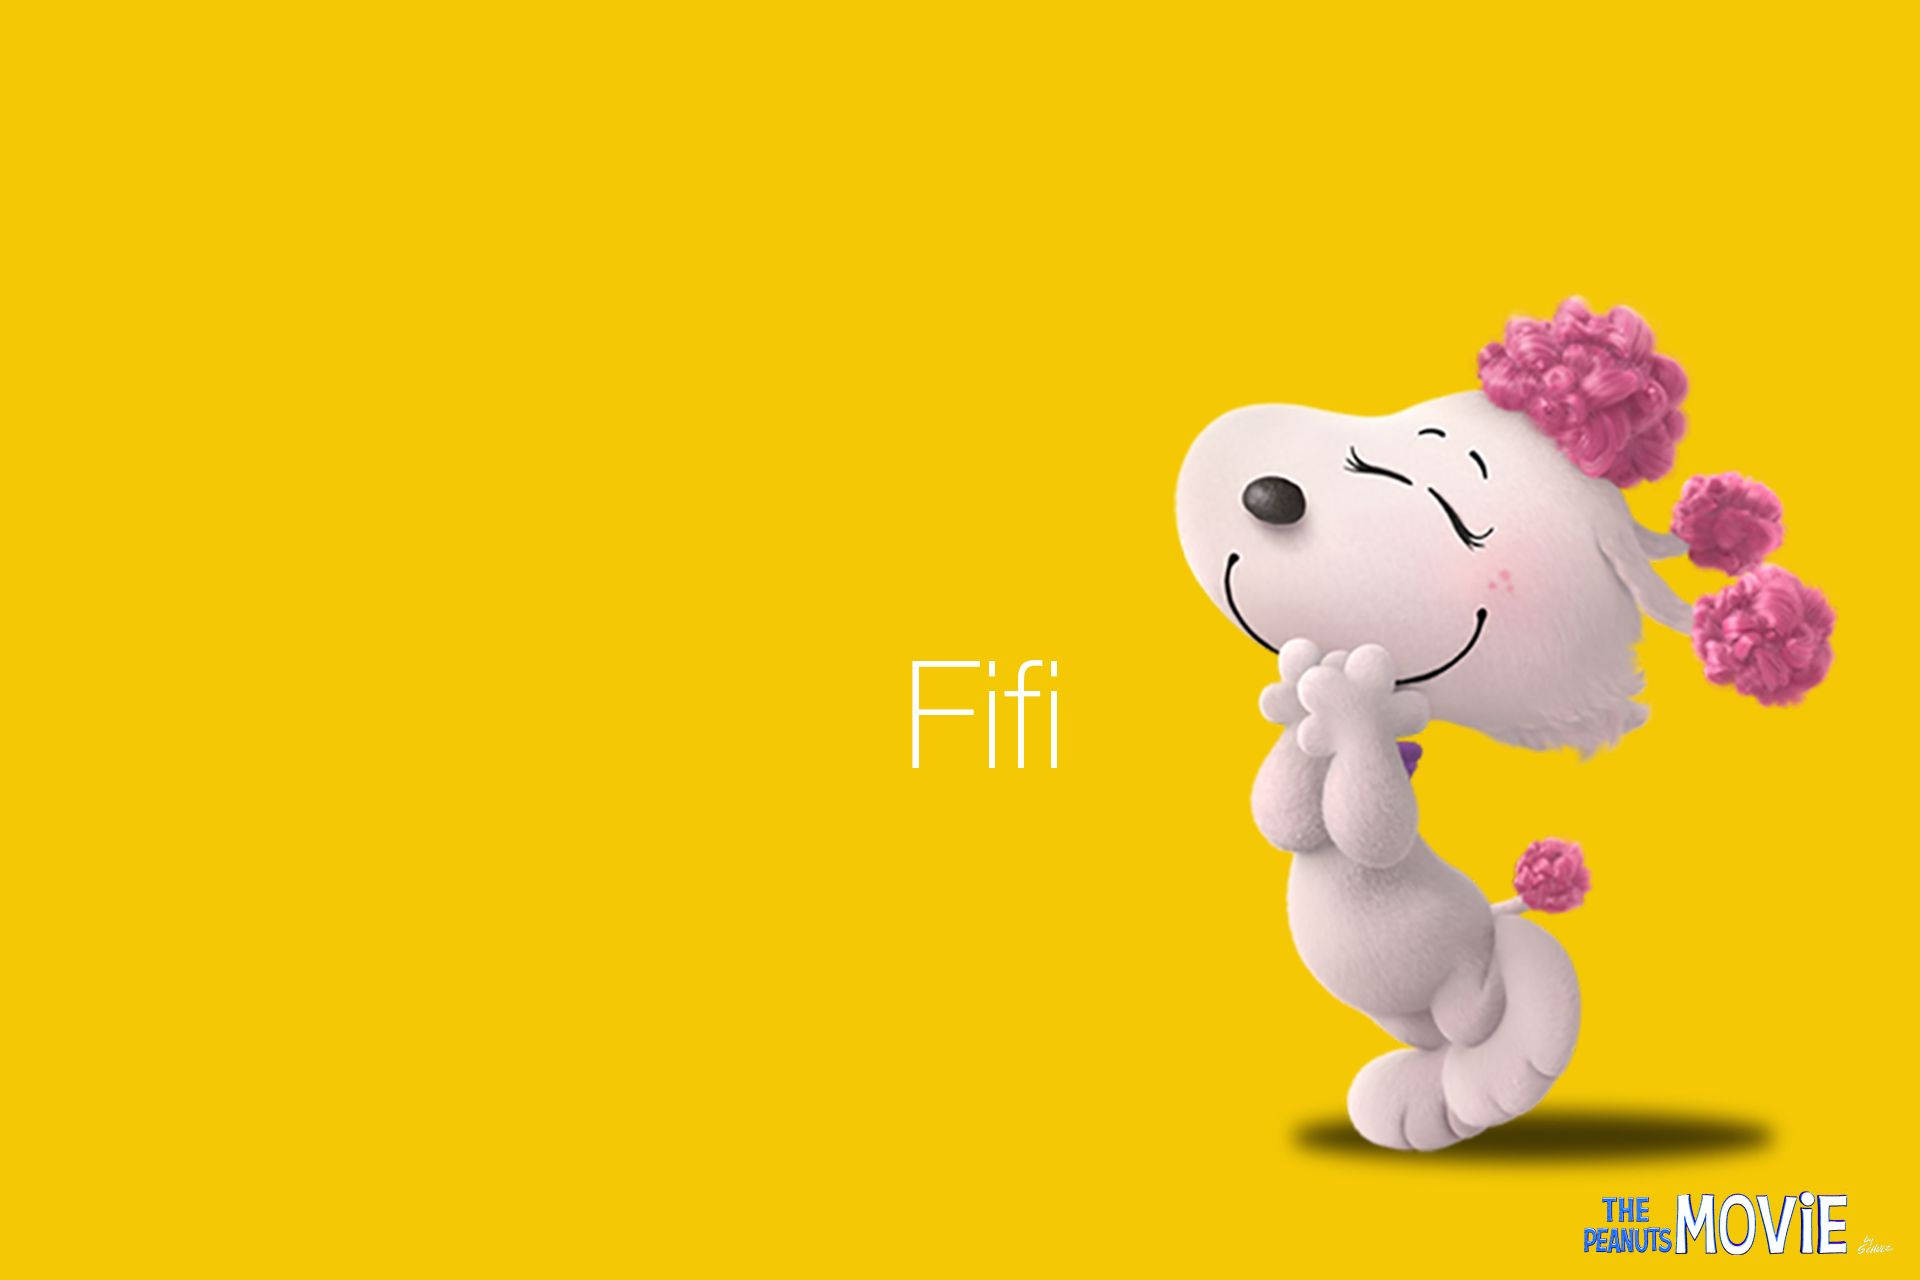 Download Fifi From The Peanuts Movie Wallpaper 